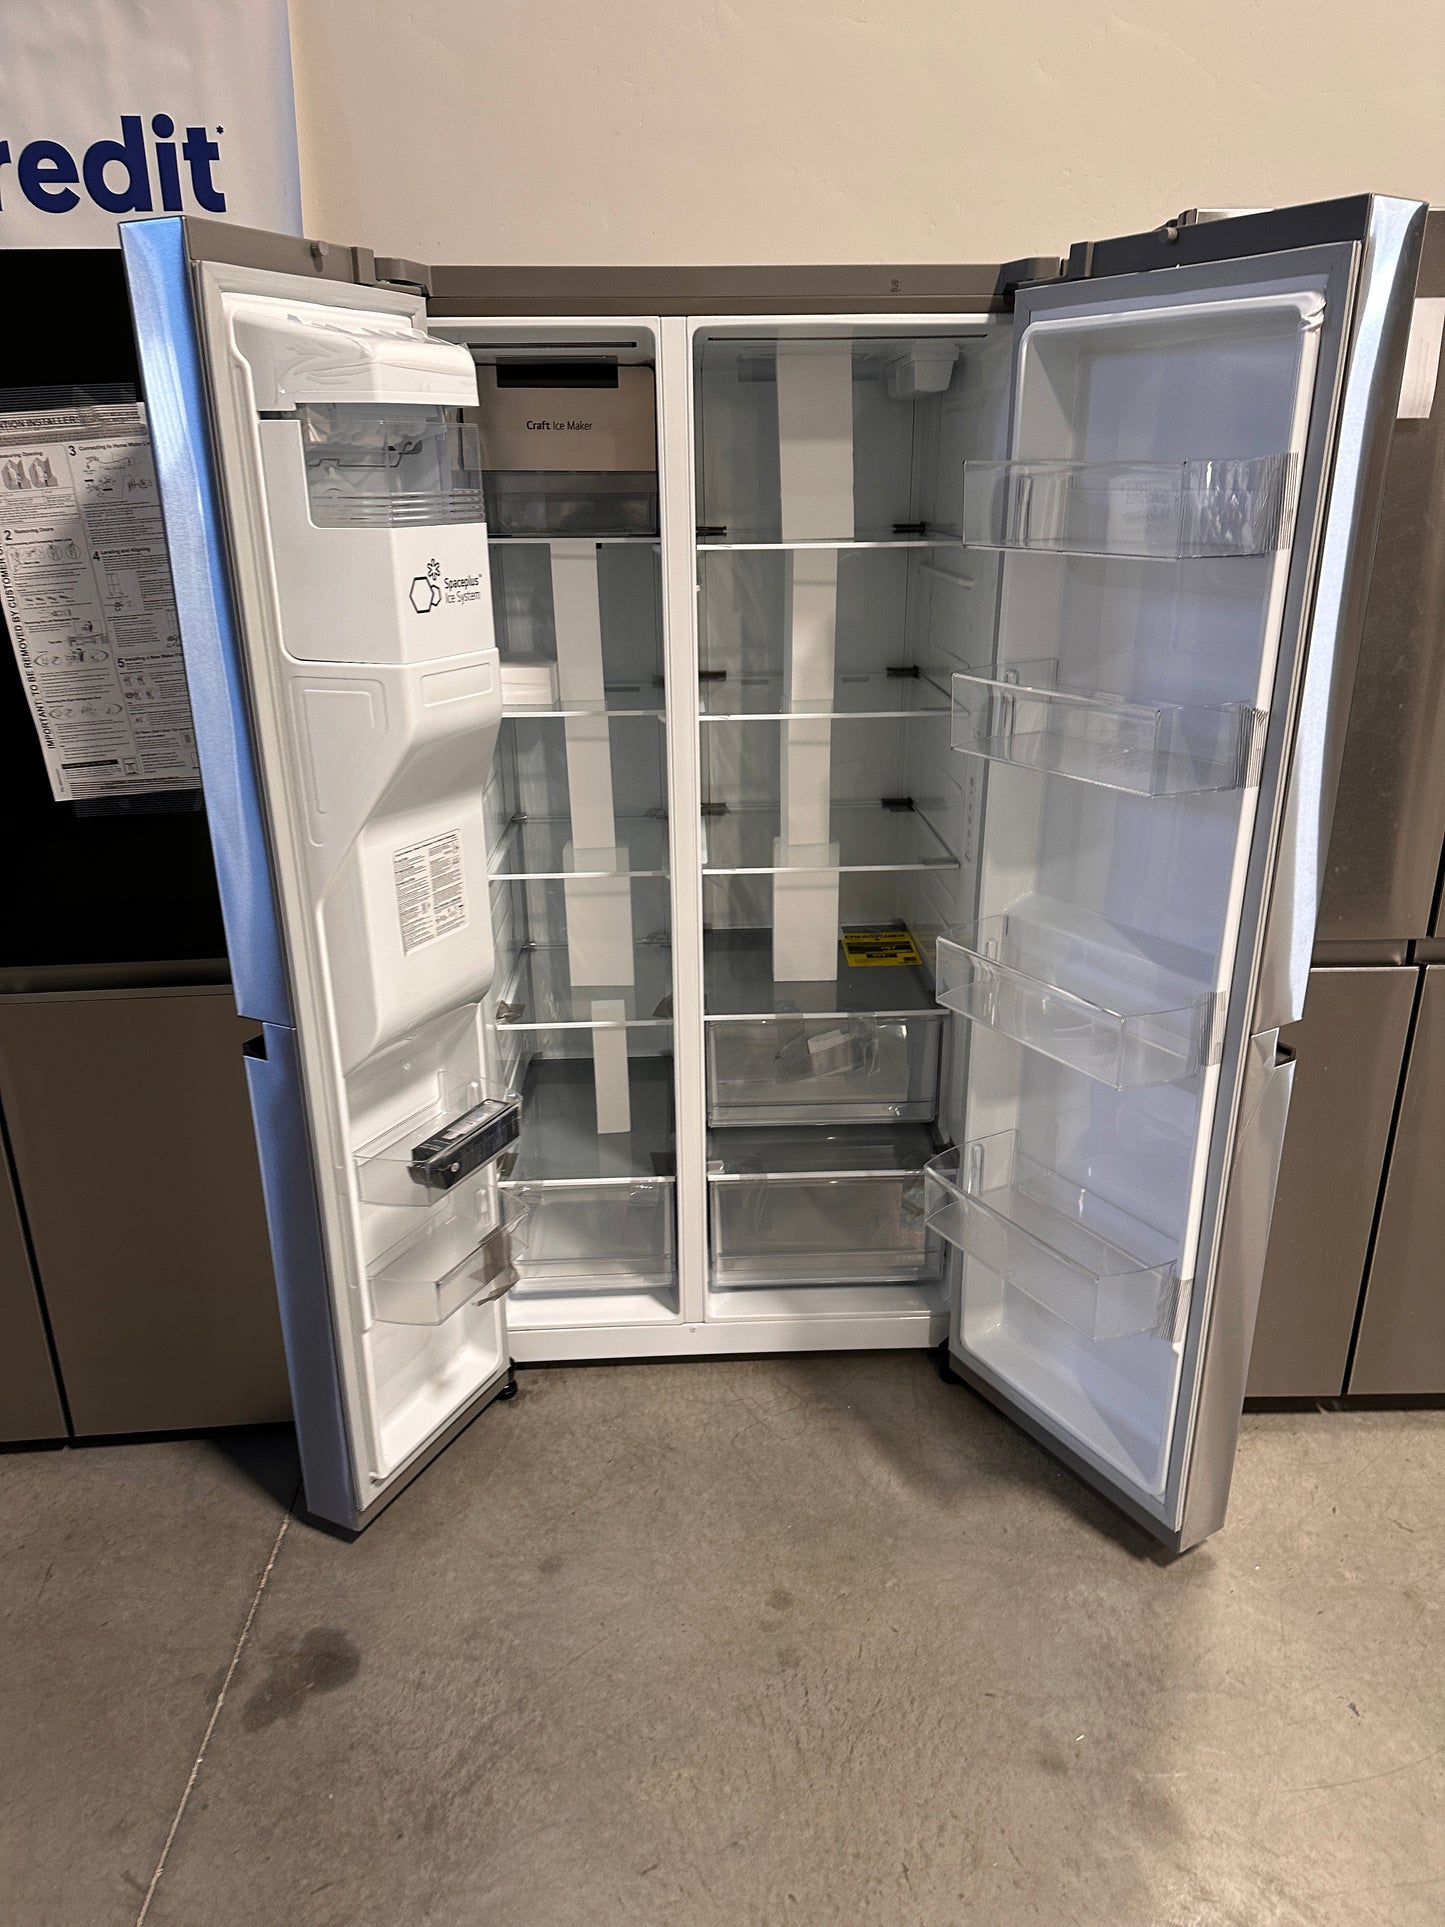 DISCOUNTED 27.2 CU FT SIDE-BY-SIDE LG REFRIGERATOR - REF12846 Model:LRSXS2706S